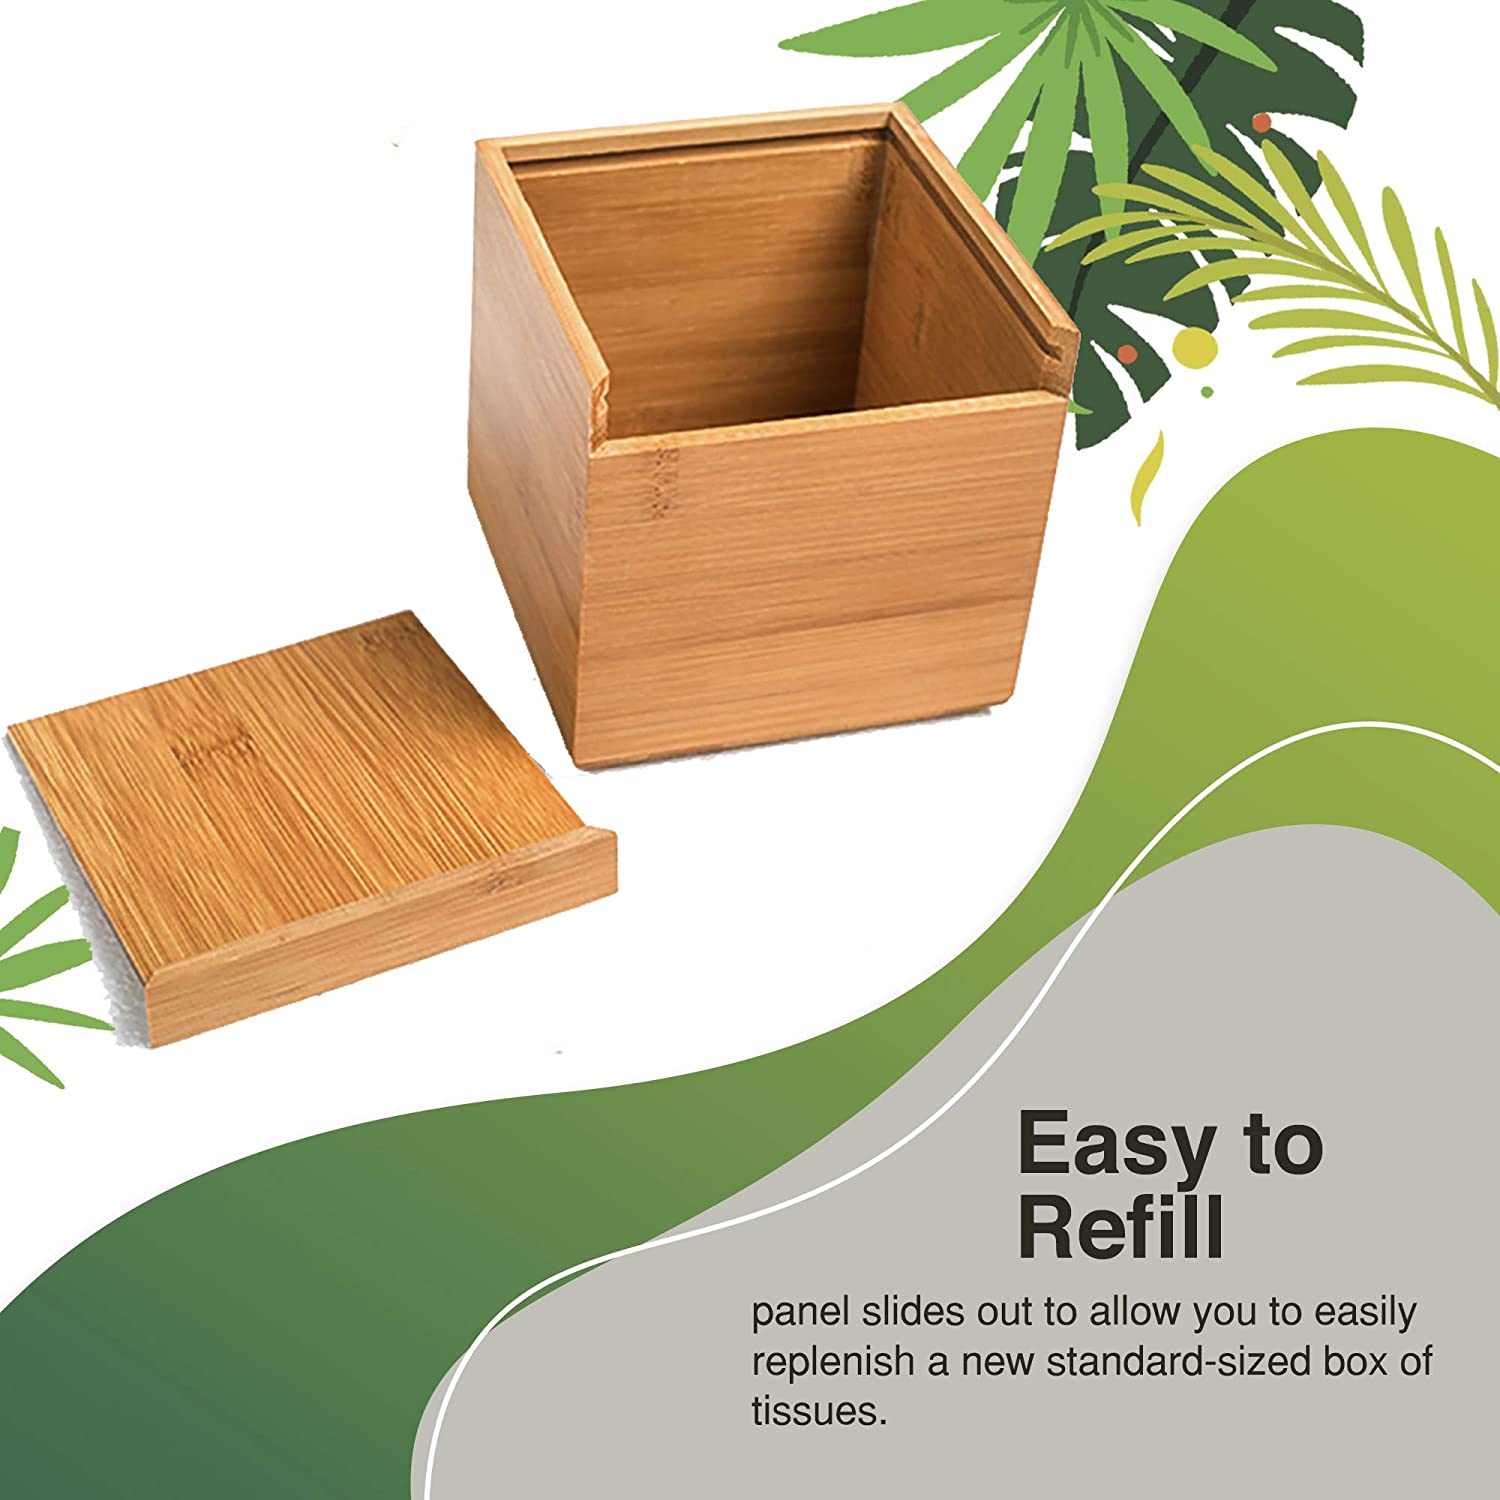 Square Bamboo Tissue Box Cover - Water Resistant - 16 X 14 X 14 cm